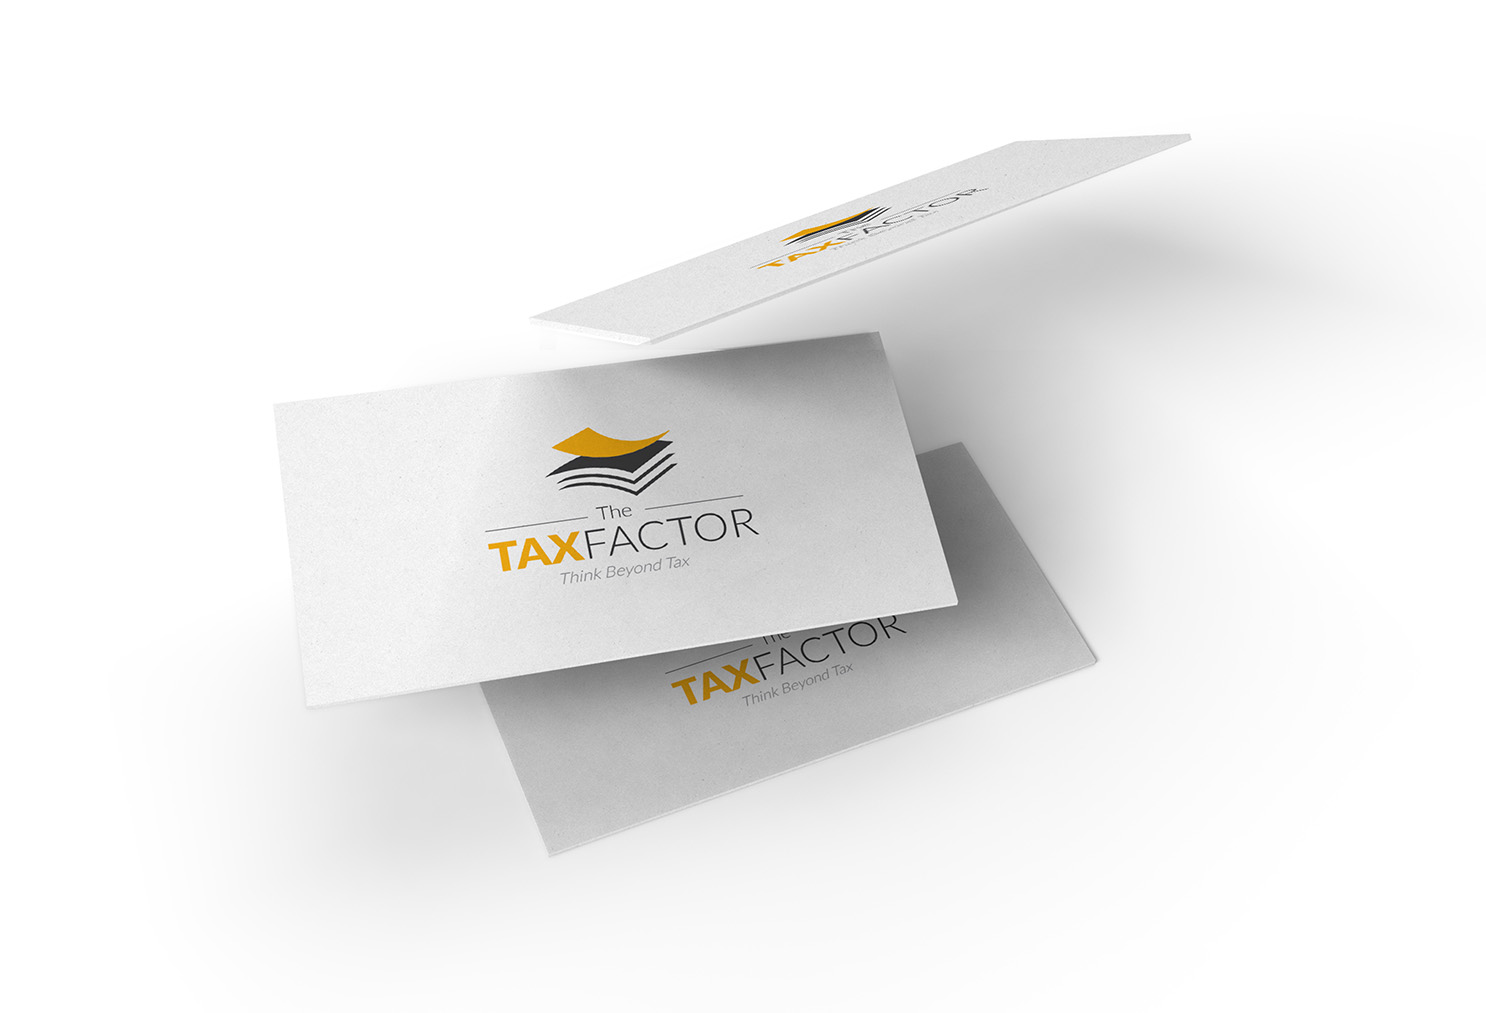 The Tax Factor